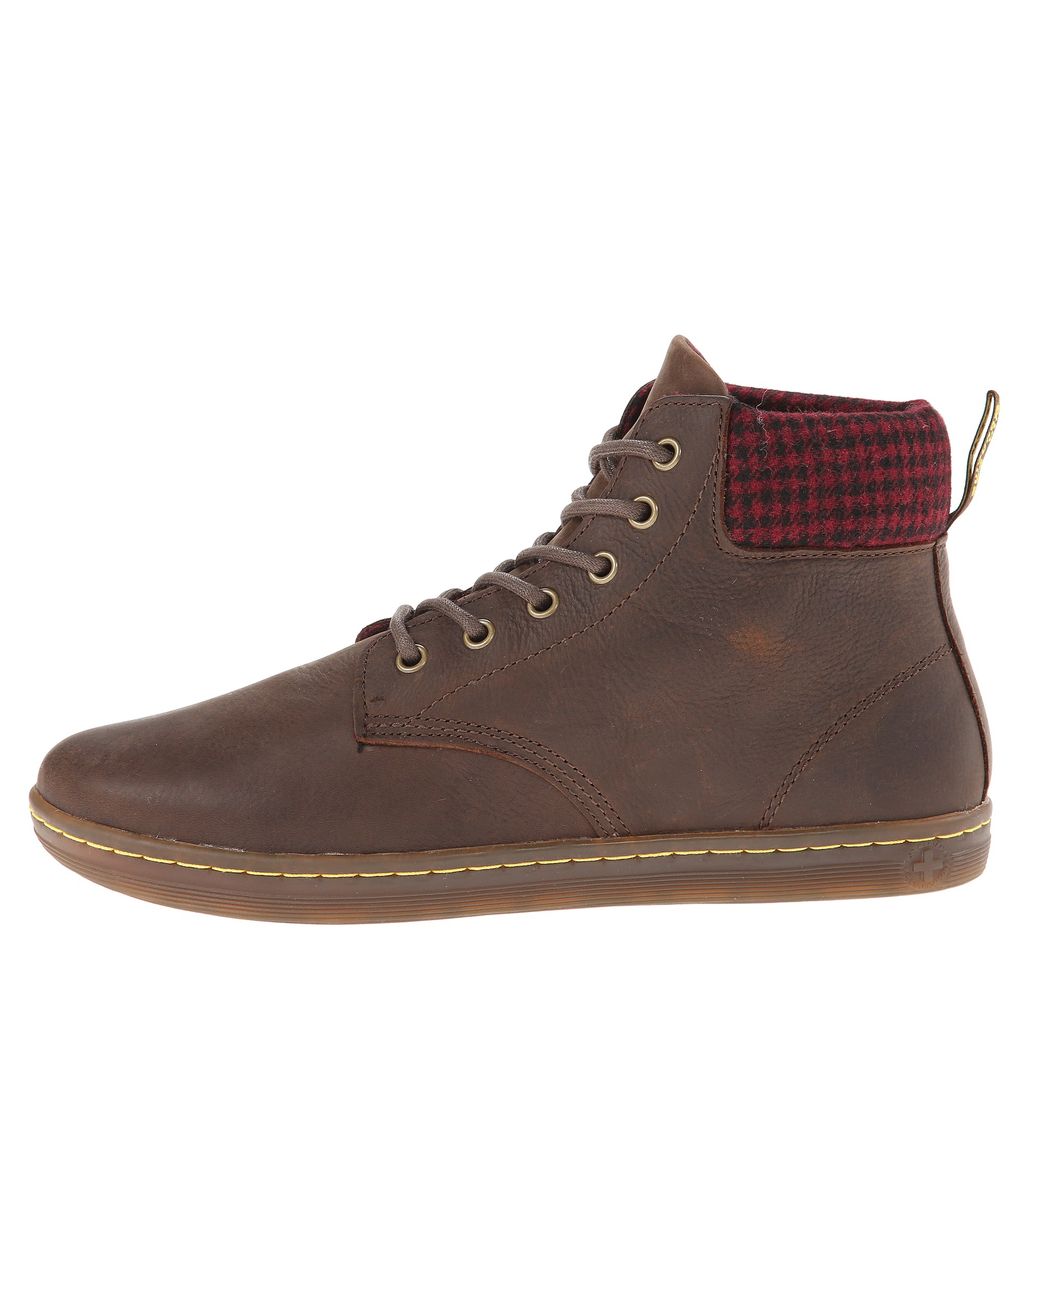 Dr. Martens Maelly Padded Collar Boot in Brown | Lyst